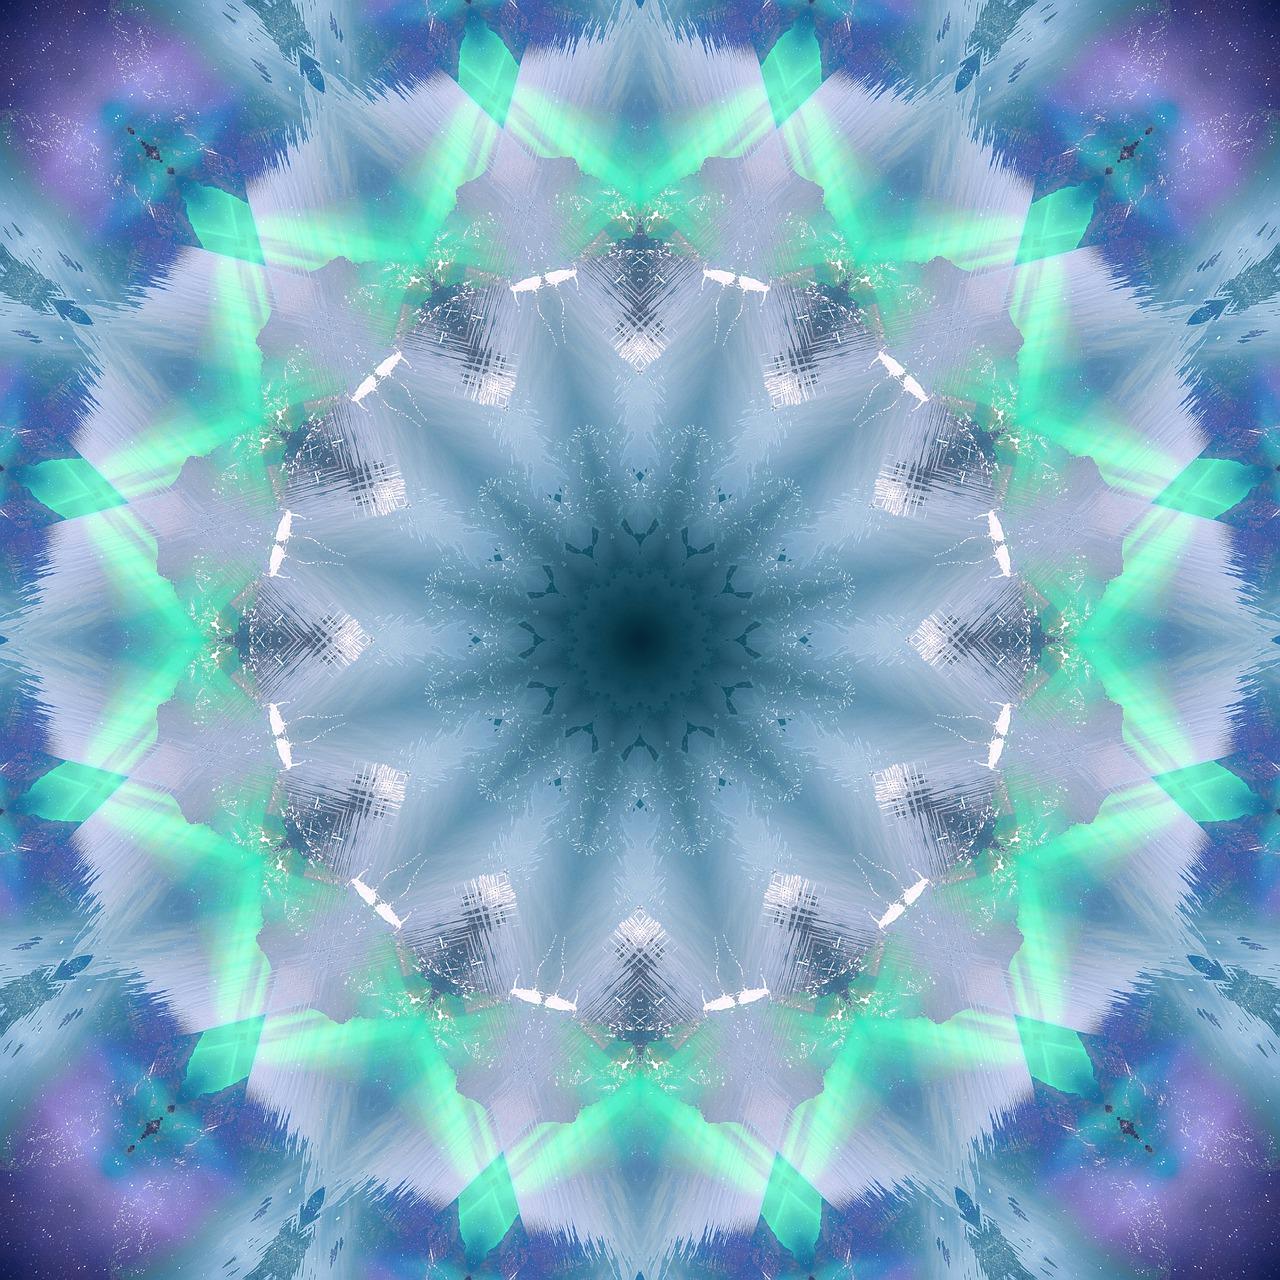 kaleidoscope meaning in life